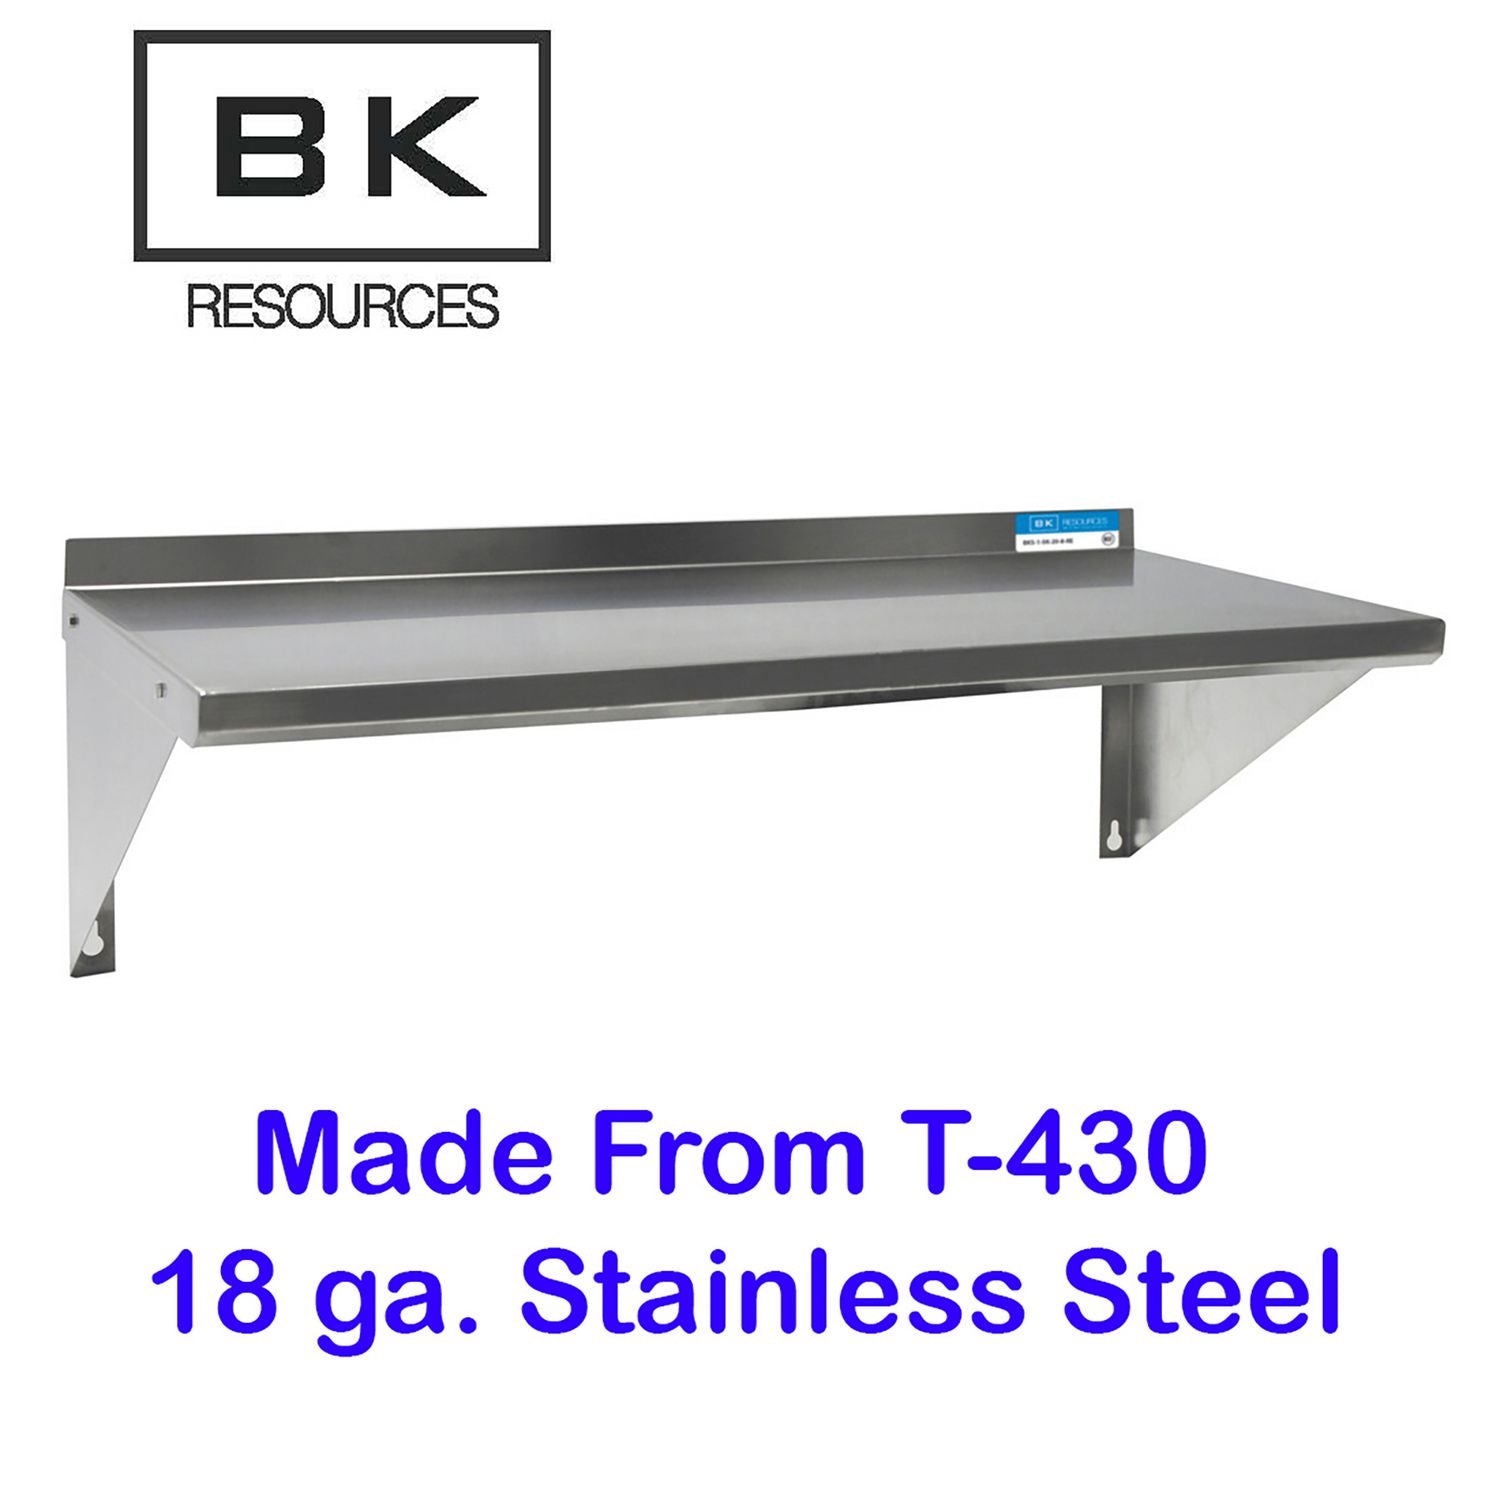 stainless-steel-economy-overshelf-48w-x-16d-x-115h-stainless-steel-silver-2-pallet-ships-in-4-6-business-days_bke2wse1648 - 3